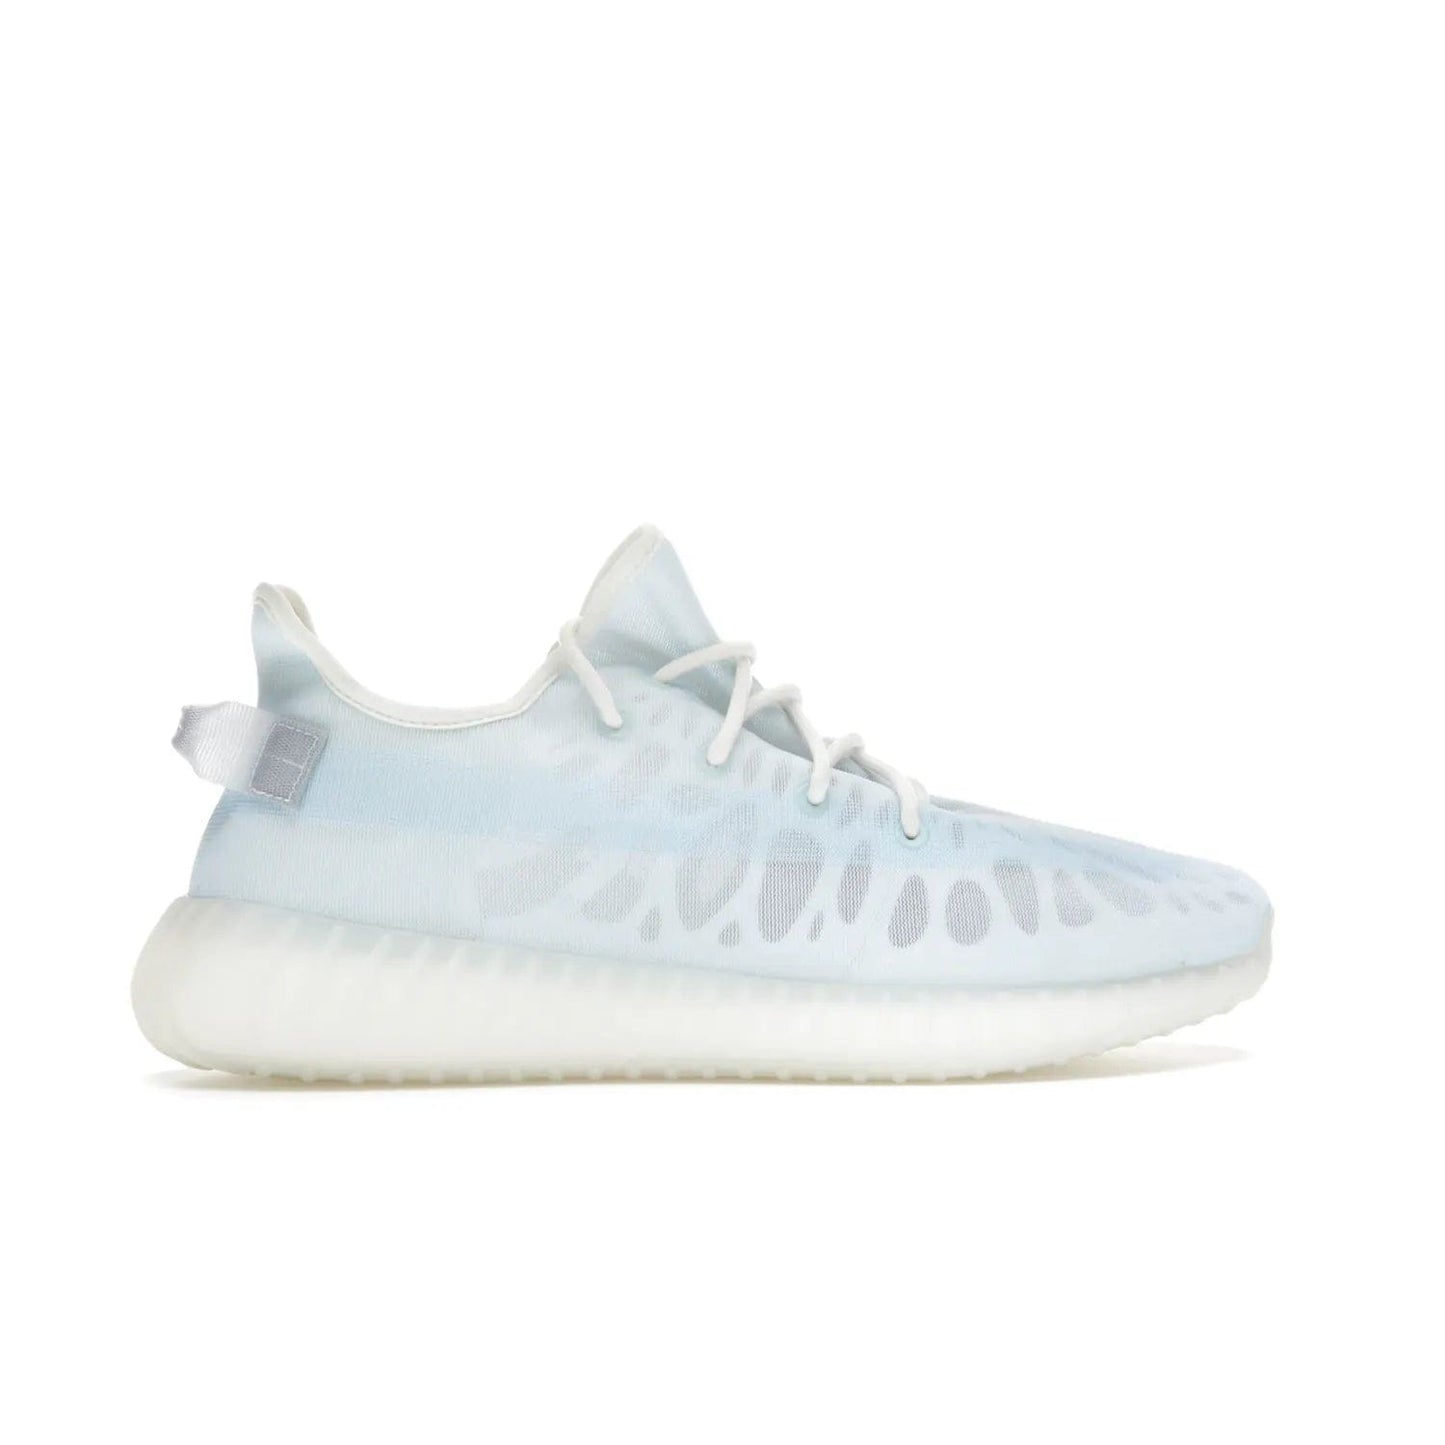 adidas Yeezy Boost 350 V2 Mono Ice - Image 36 - Only at www.BallersClubKickz.com - Introducing the adidas Yeezy 350 V2 Mono Ice - a sleek monofilament mesh design in Ice blue with Boost sole and heel pull tab. Released exclusively in the US for $220.